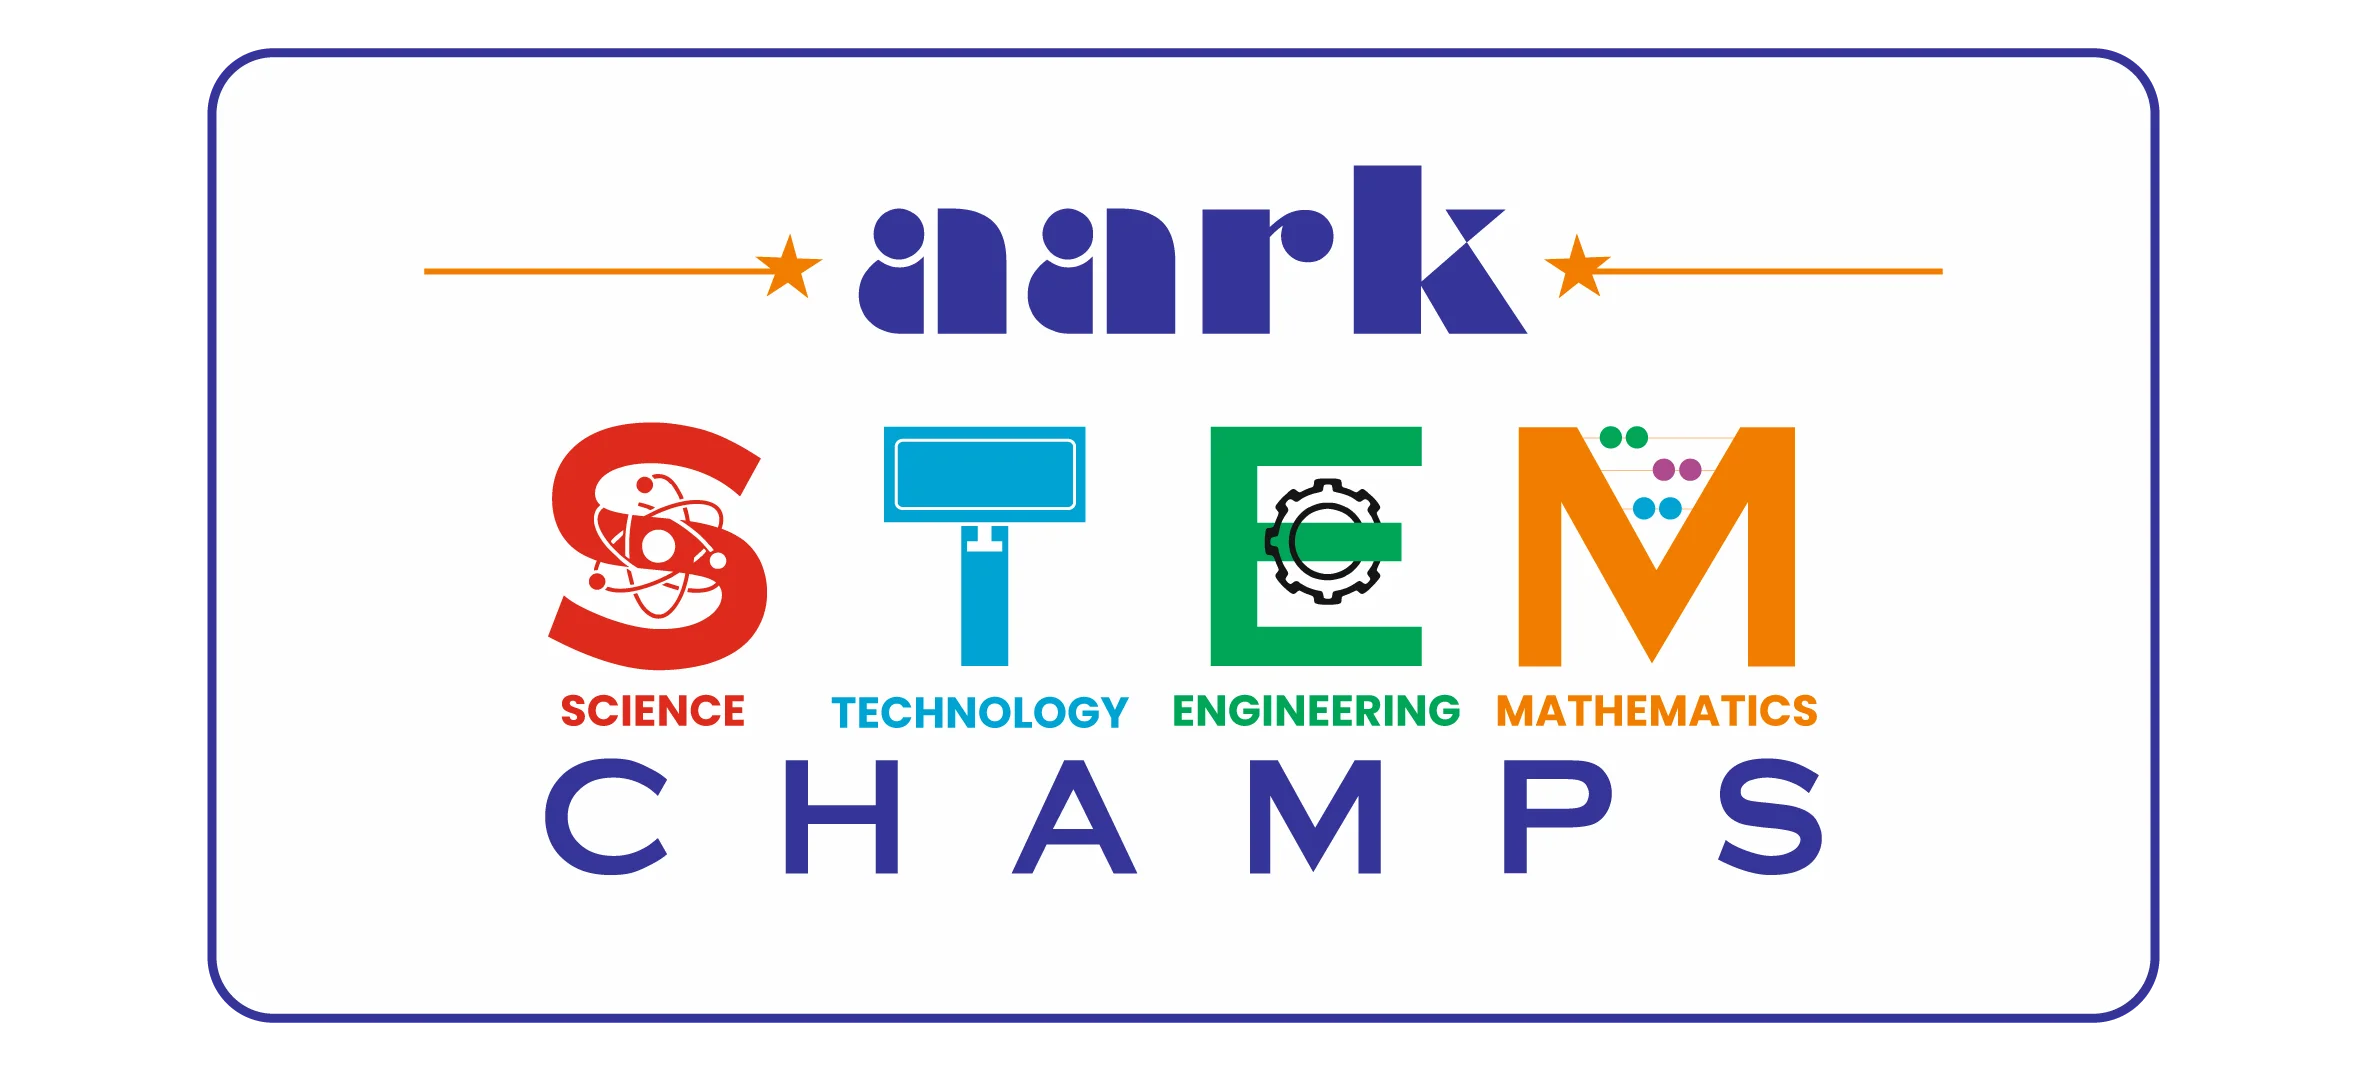 Stem Champs Know More